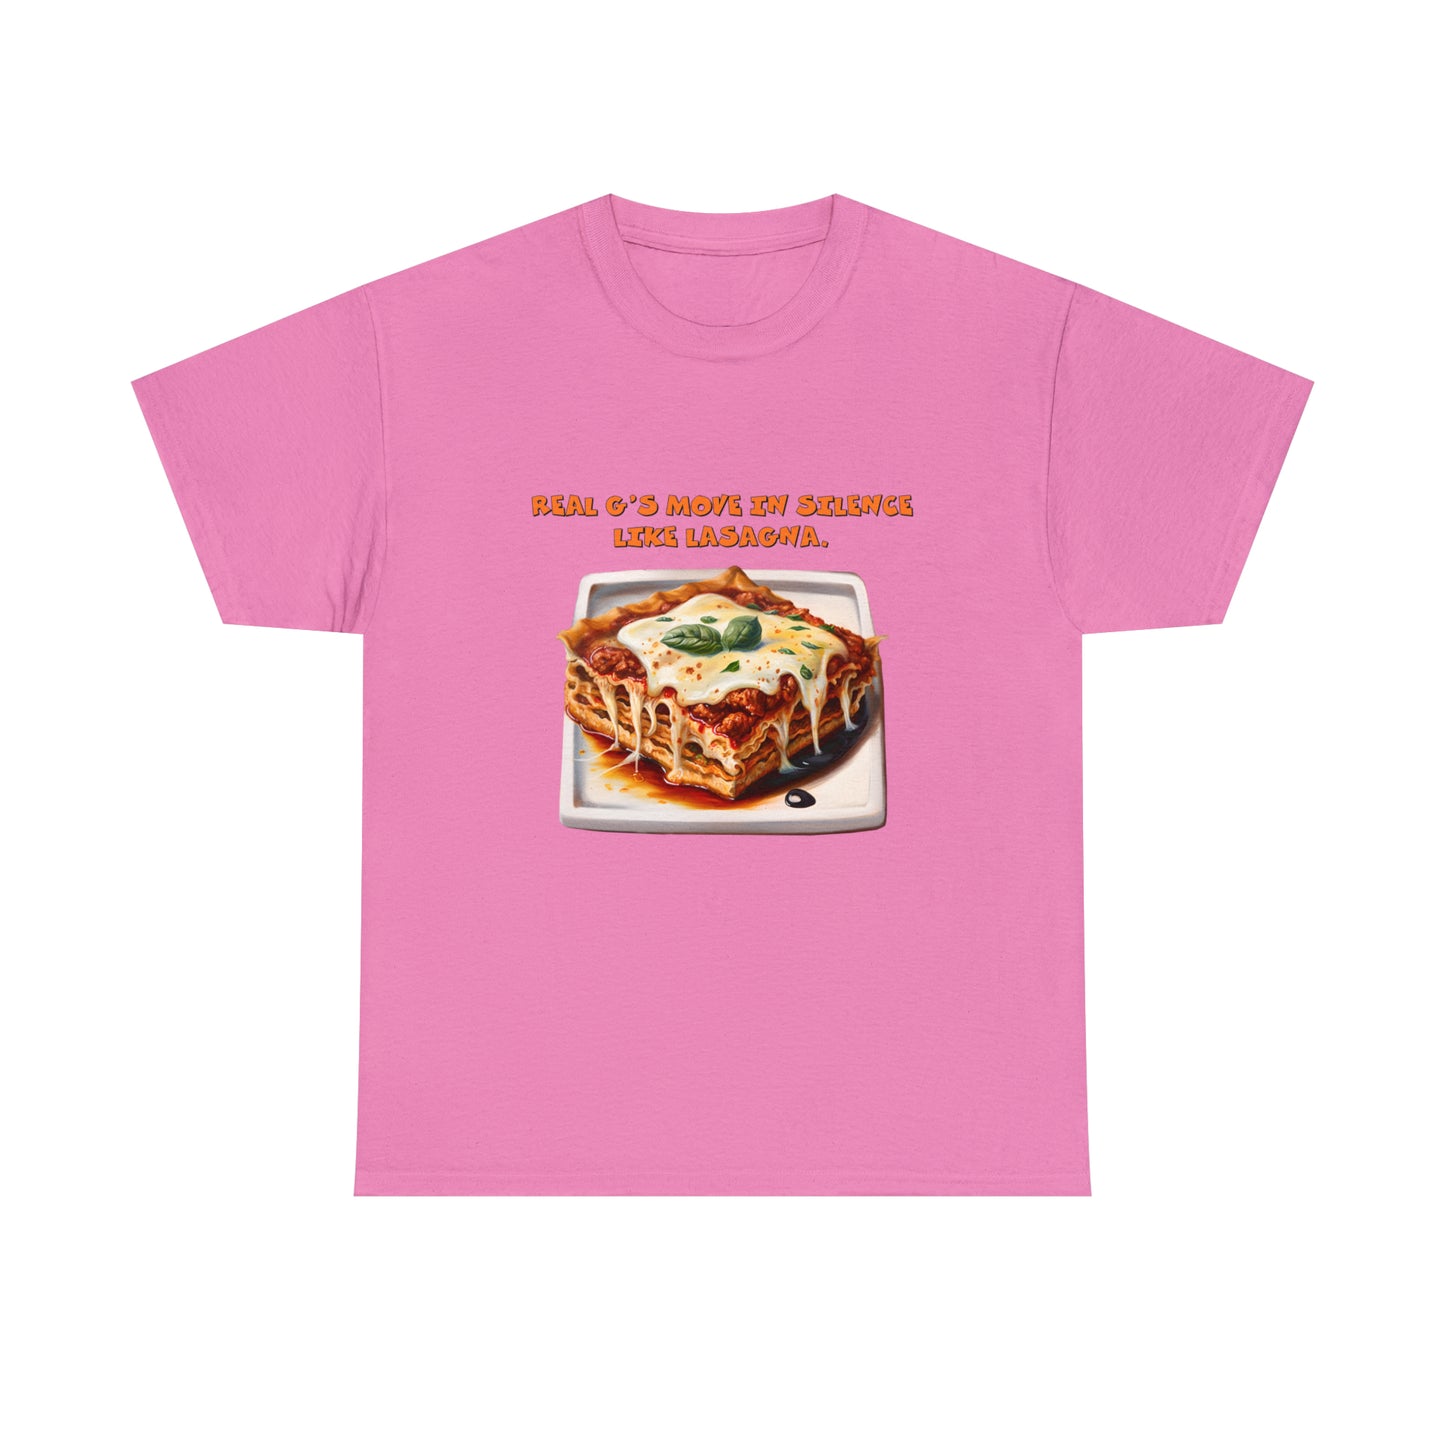 Real G's Move In Silence Like Lasagna - Unisex Heavy Cotton Tee